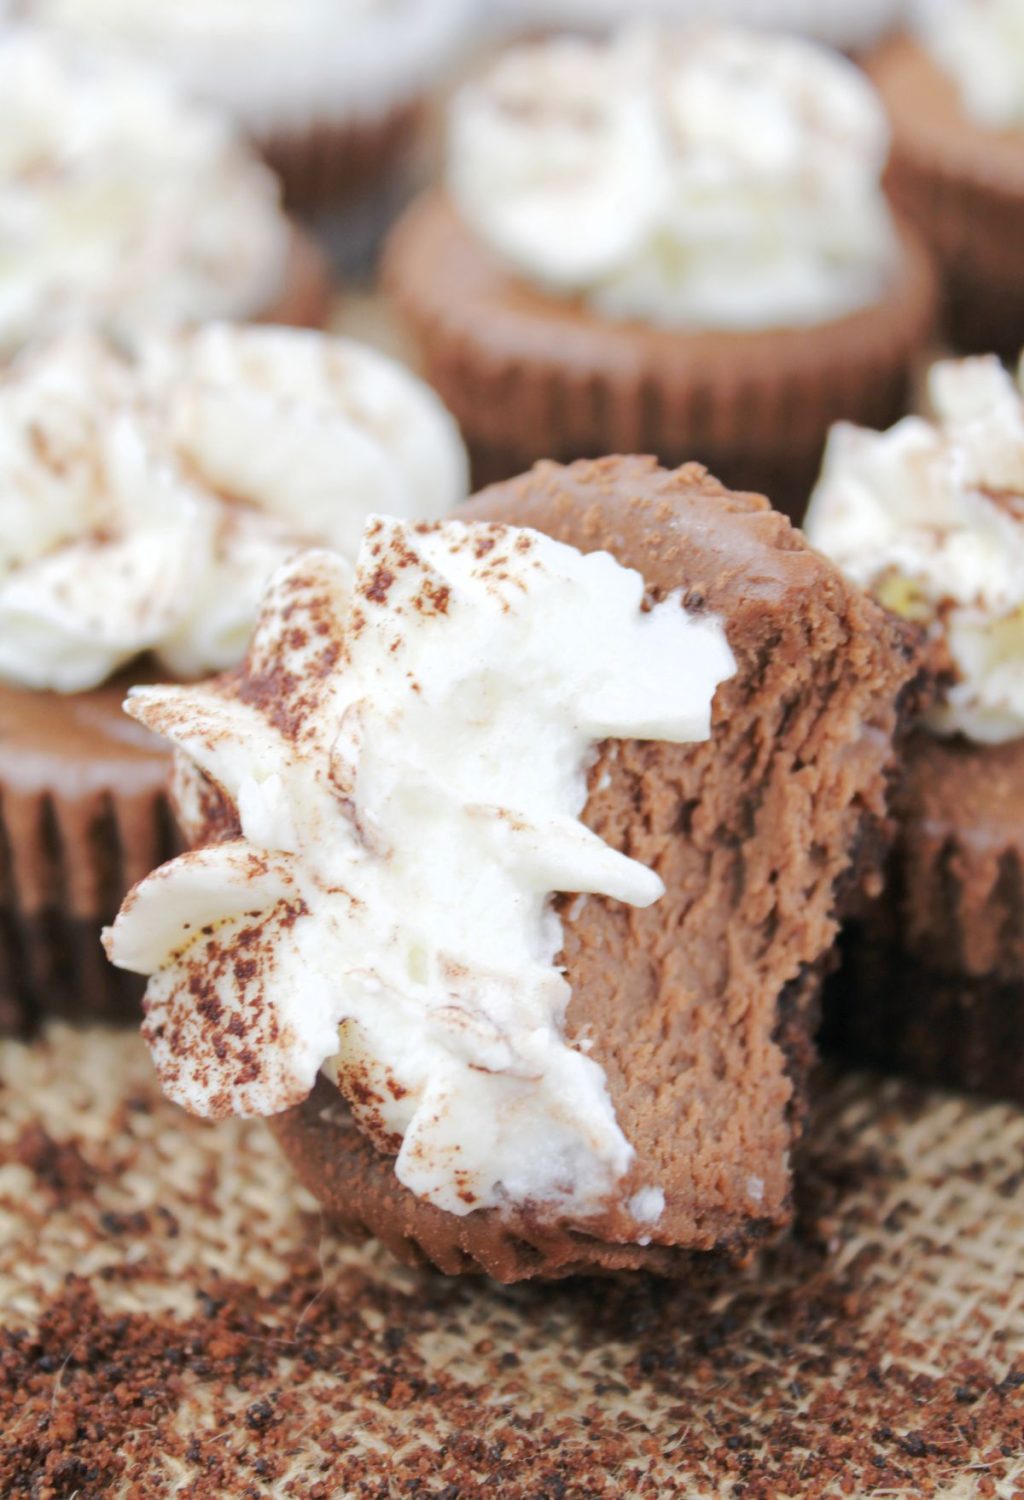 A group of chocolate cupcakes with kahlua-infused whipped cream on top.